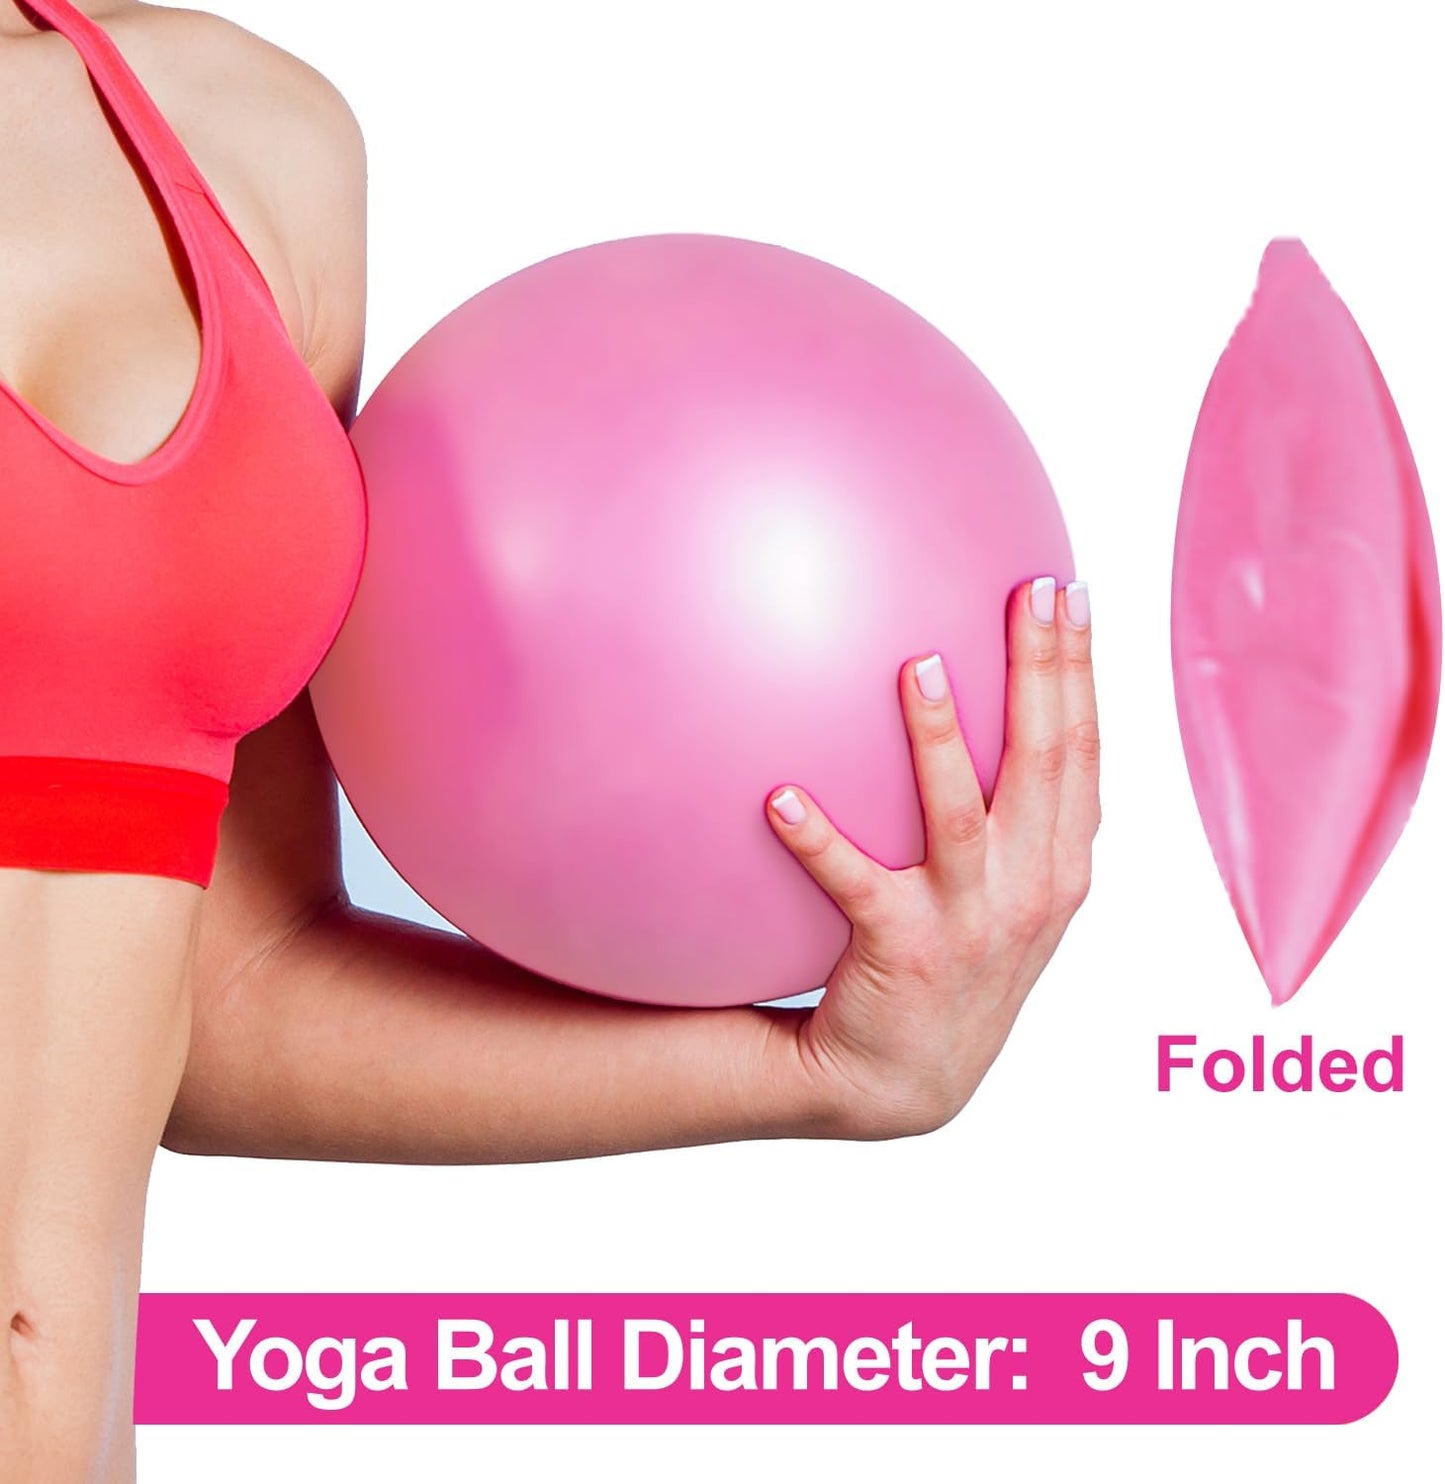 Nononfish Mini Exercise Barre Ball for Yoga,Pilates, Stability Exercise Home Workout, Core Training and Physical Therapy Small Bender Ball 9 Inch with Inflatable Straw